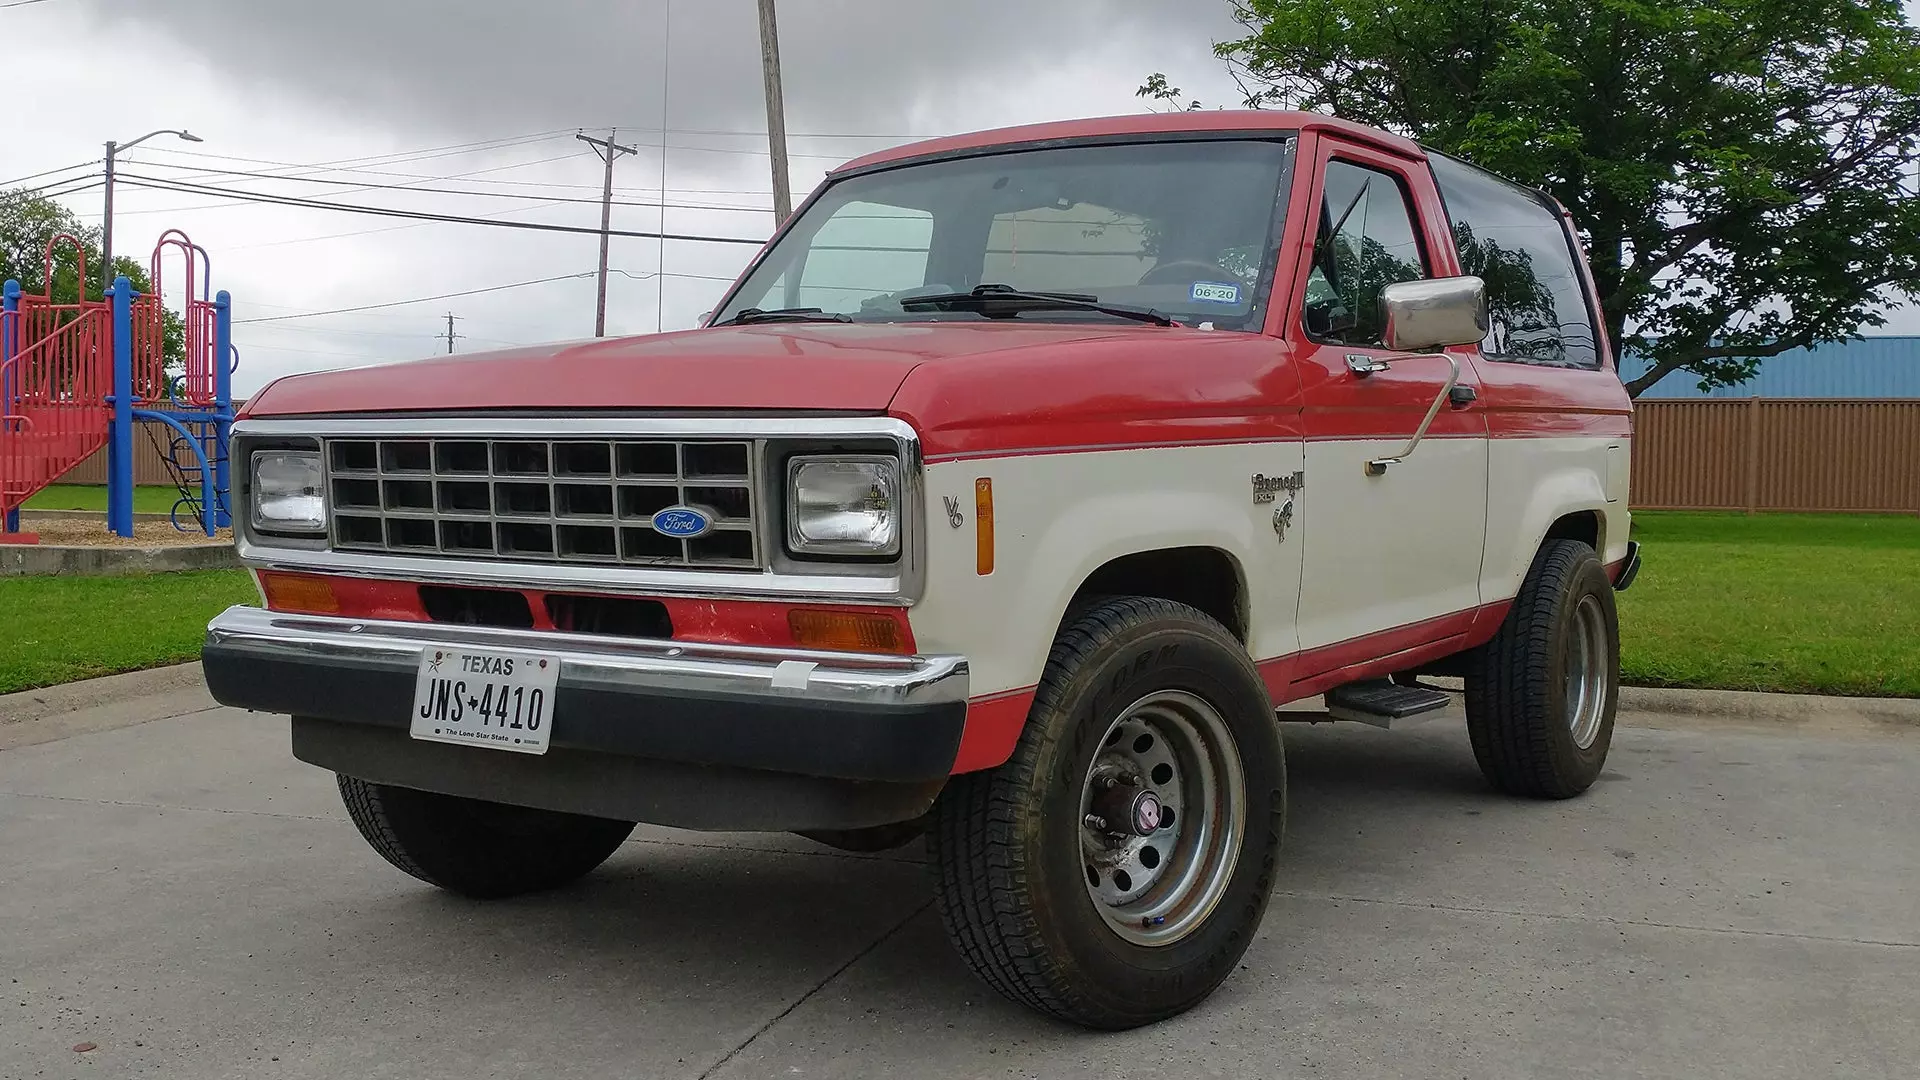 Why I Love My 1986 Ford Bronco II, A Criminally Underrated Classic 4&#215;4 | Autance